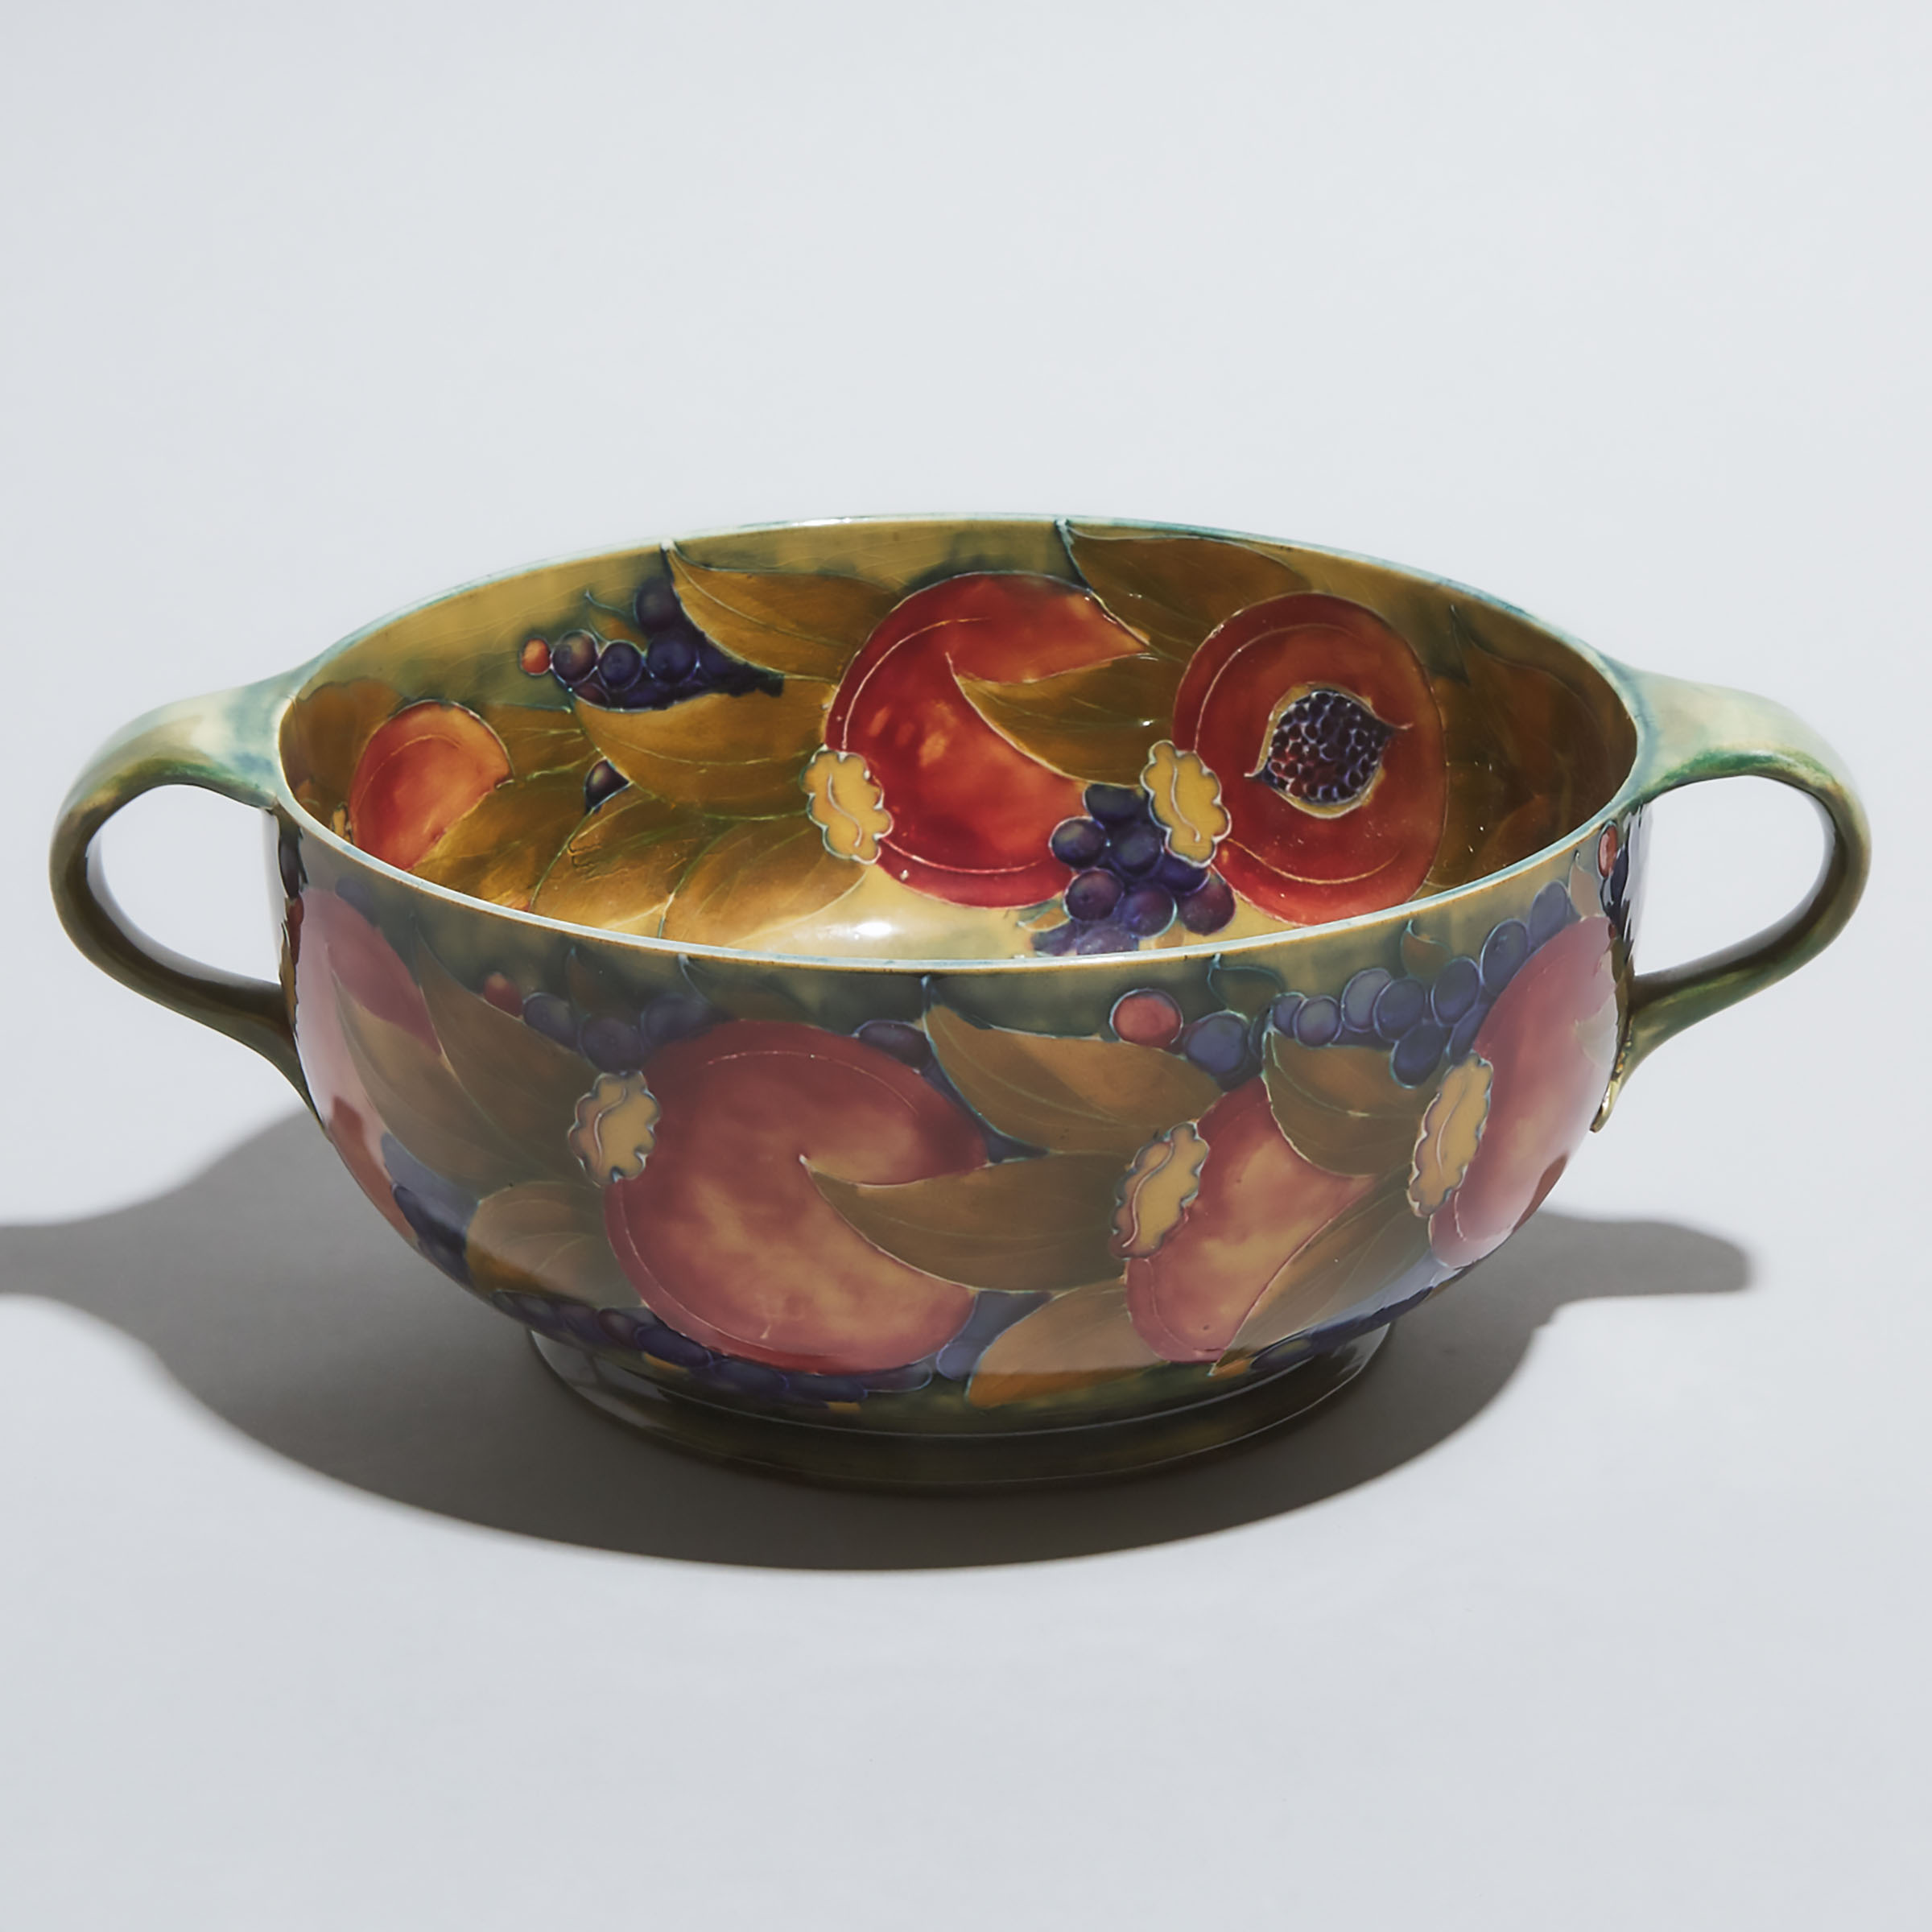 Macintyre Moorcroft Pomegranate Two-Handled Bowl, for Liberty & Co., dated 1912